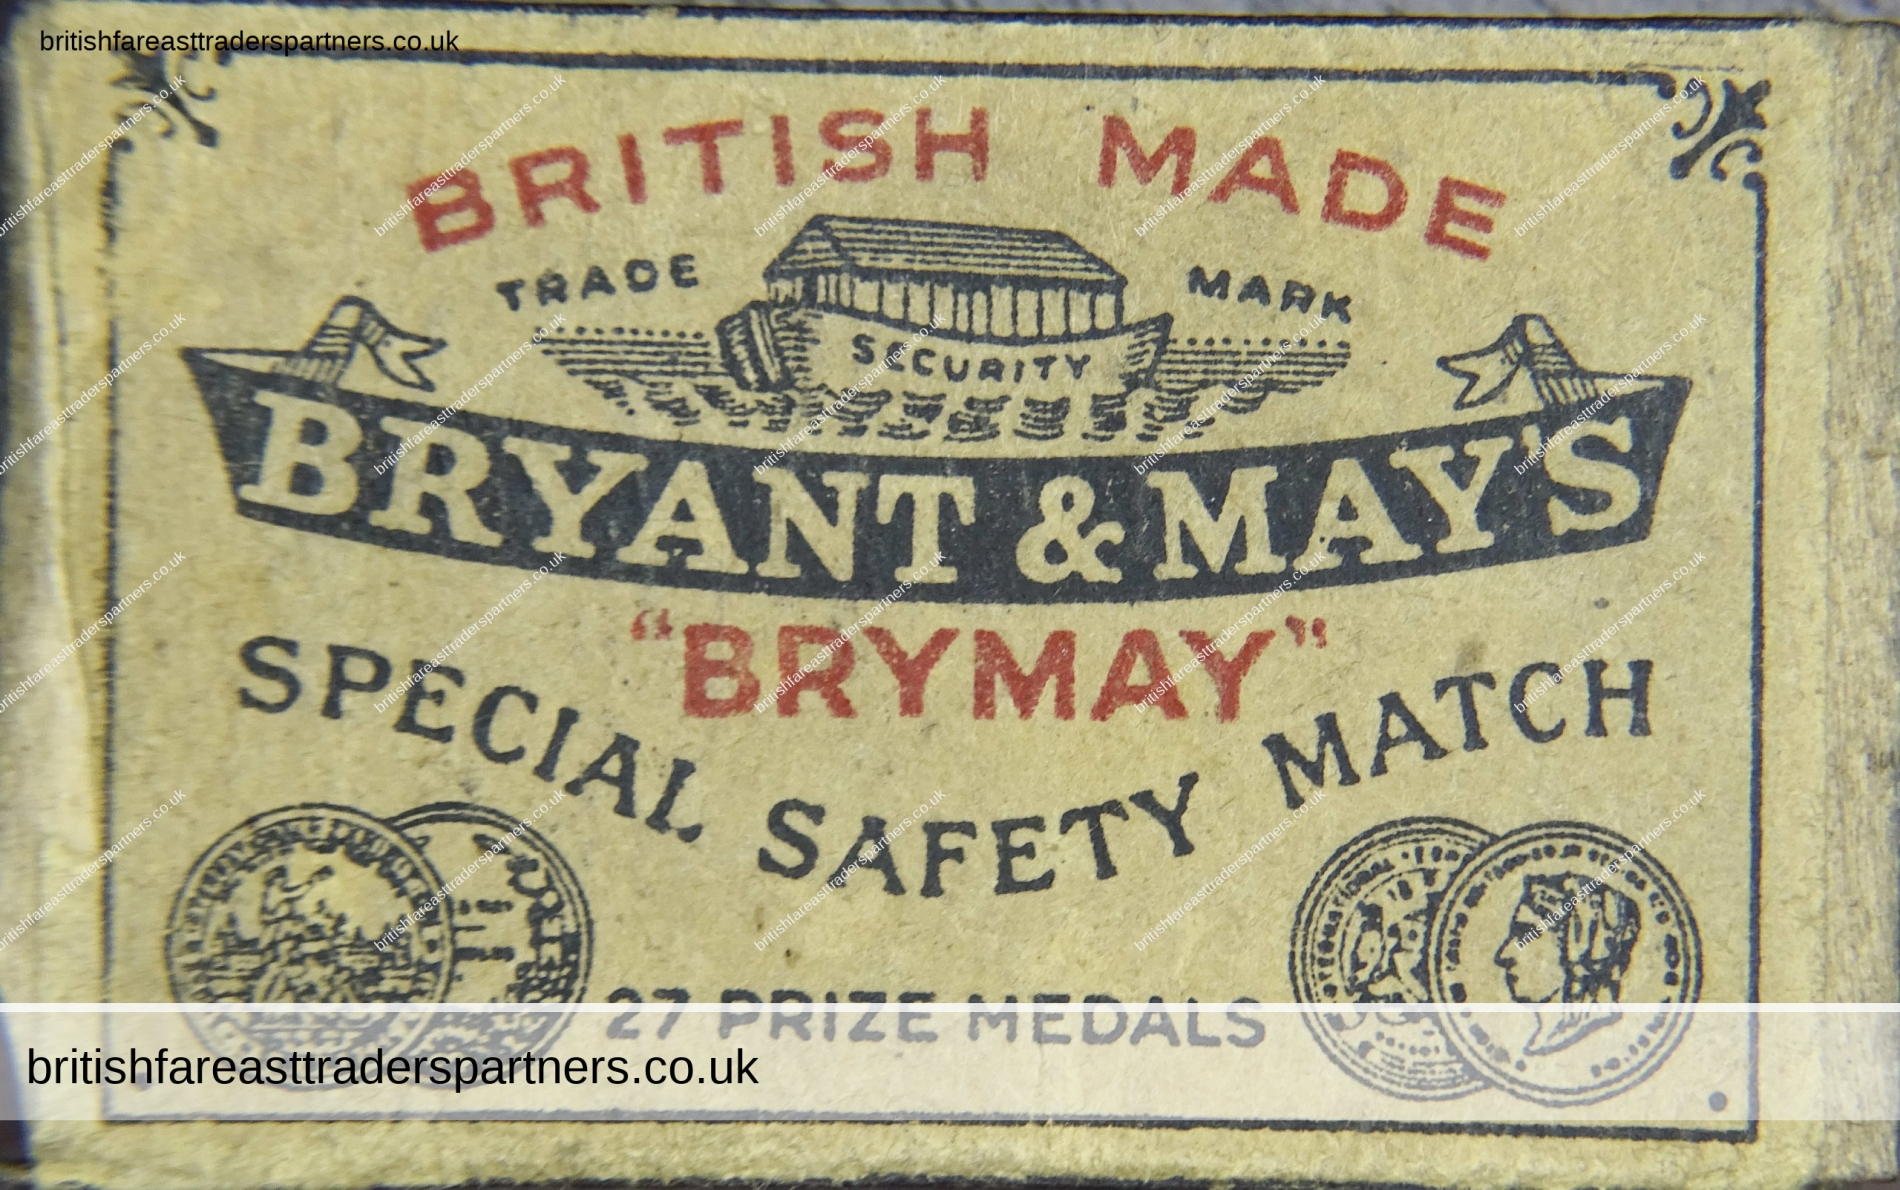 ANTIQUE VICTORIAN BRYANT & MAY’S BRYMAY 27 Prize Medals BRITISH MADE Special Safety Match ADVERTISING SMOKING SUPPLIES KITCHENALIA VICTORIANA COLLECTABLE  MATCHBOX